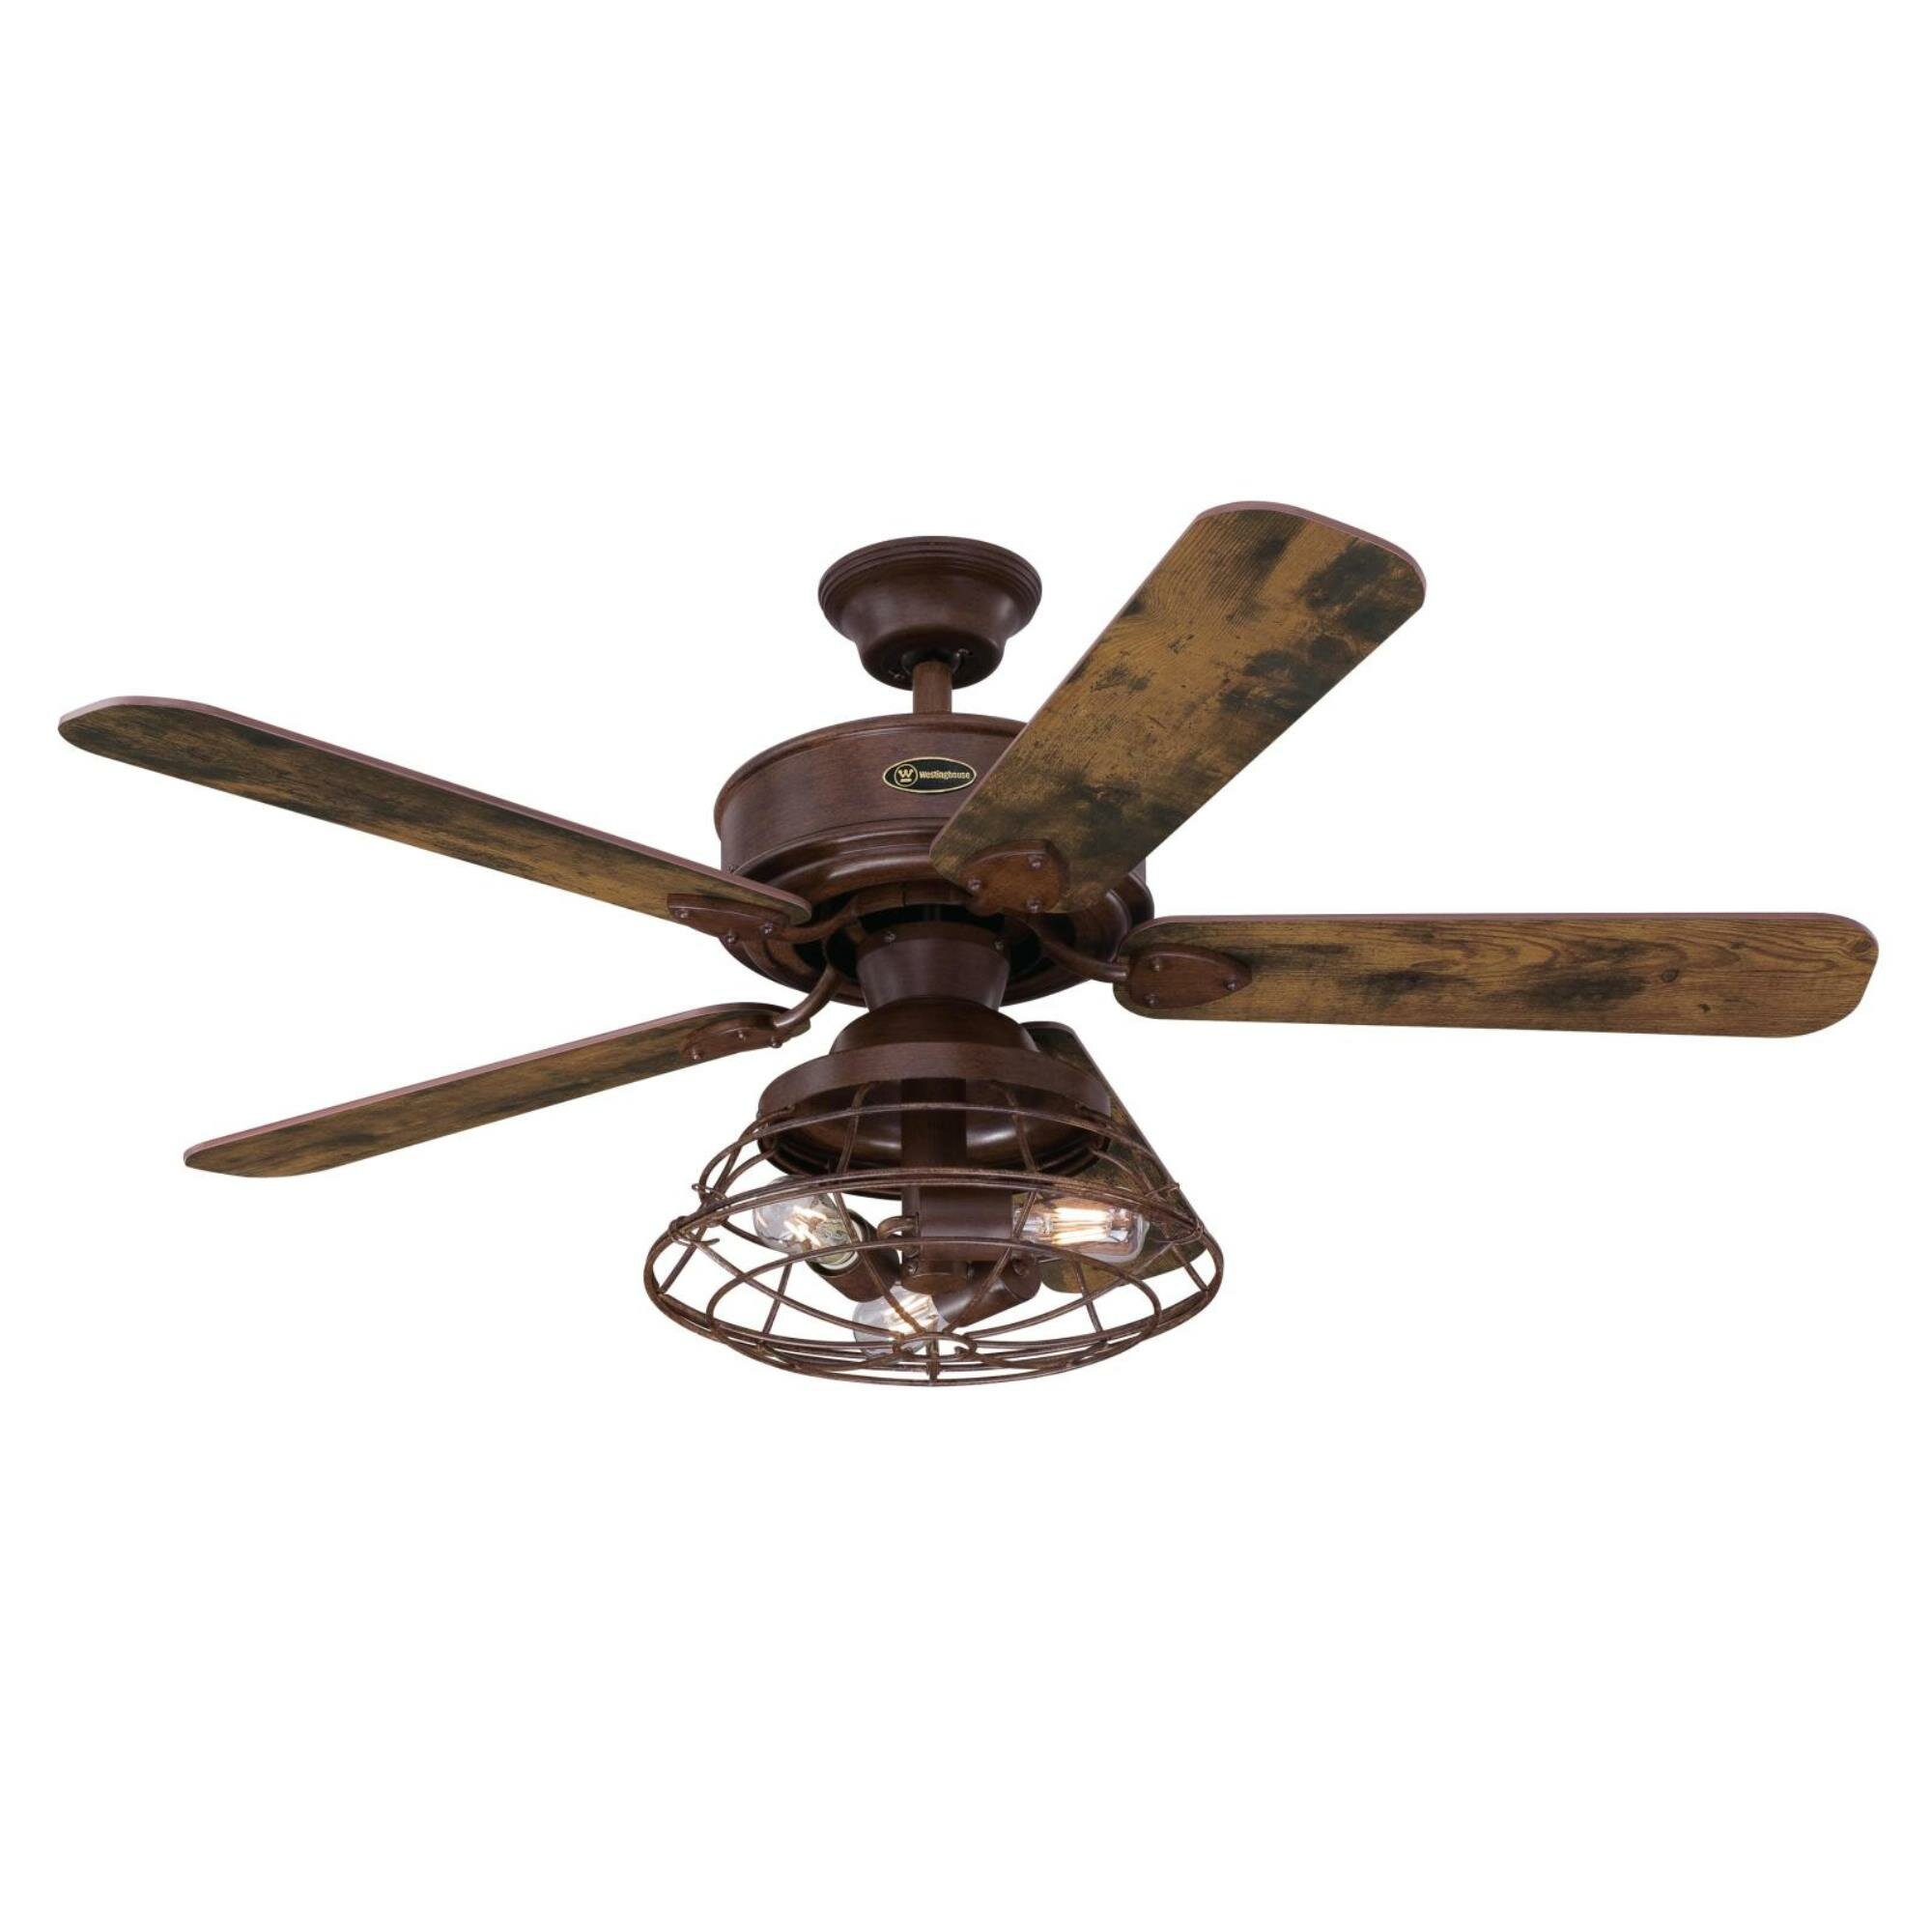 Williston Forge 48 Rothsay 5 Blade Caged Ceiling Fan With Remote Control And Light Kit Included Reviews Wayfair